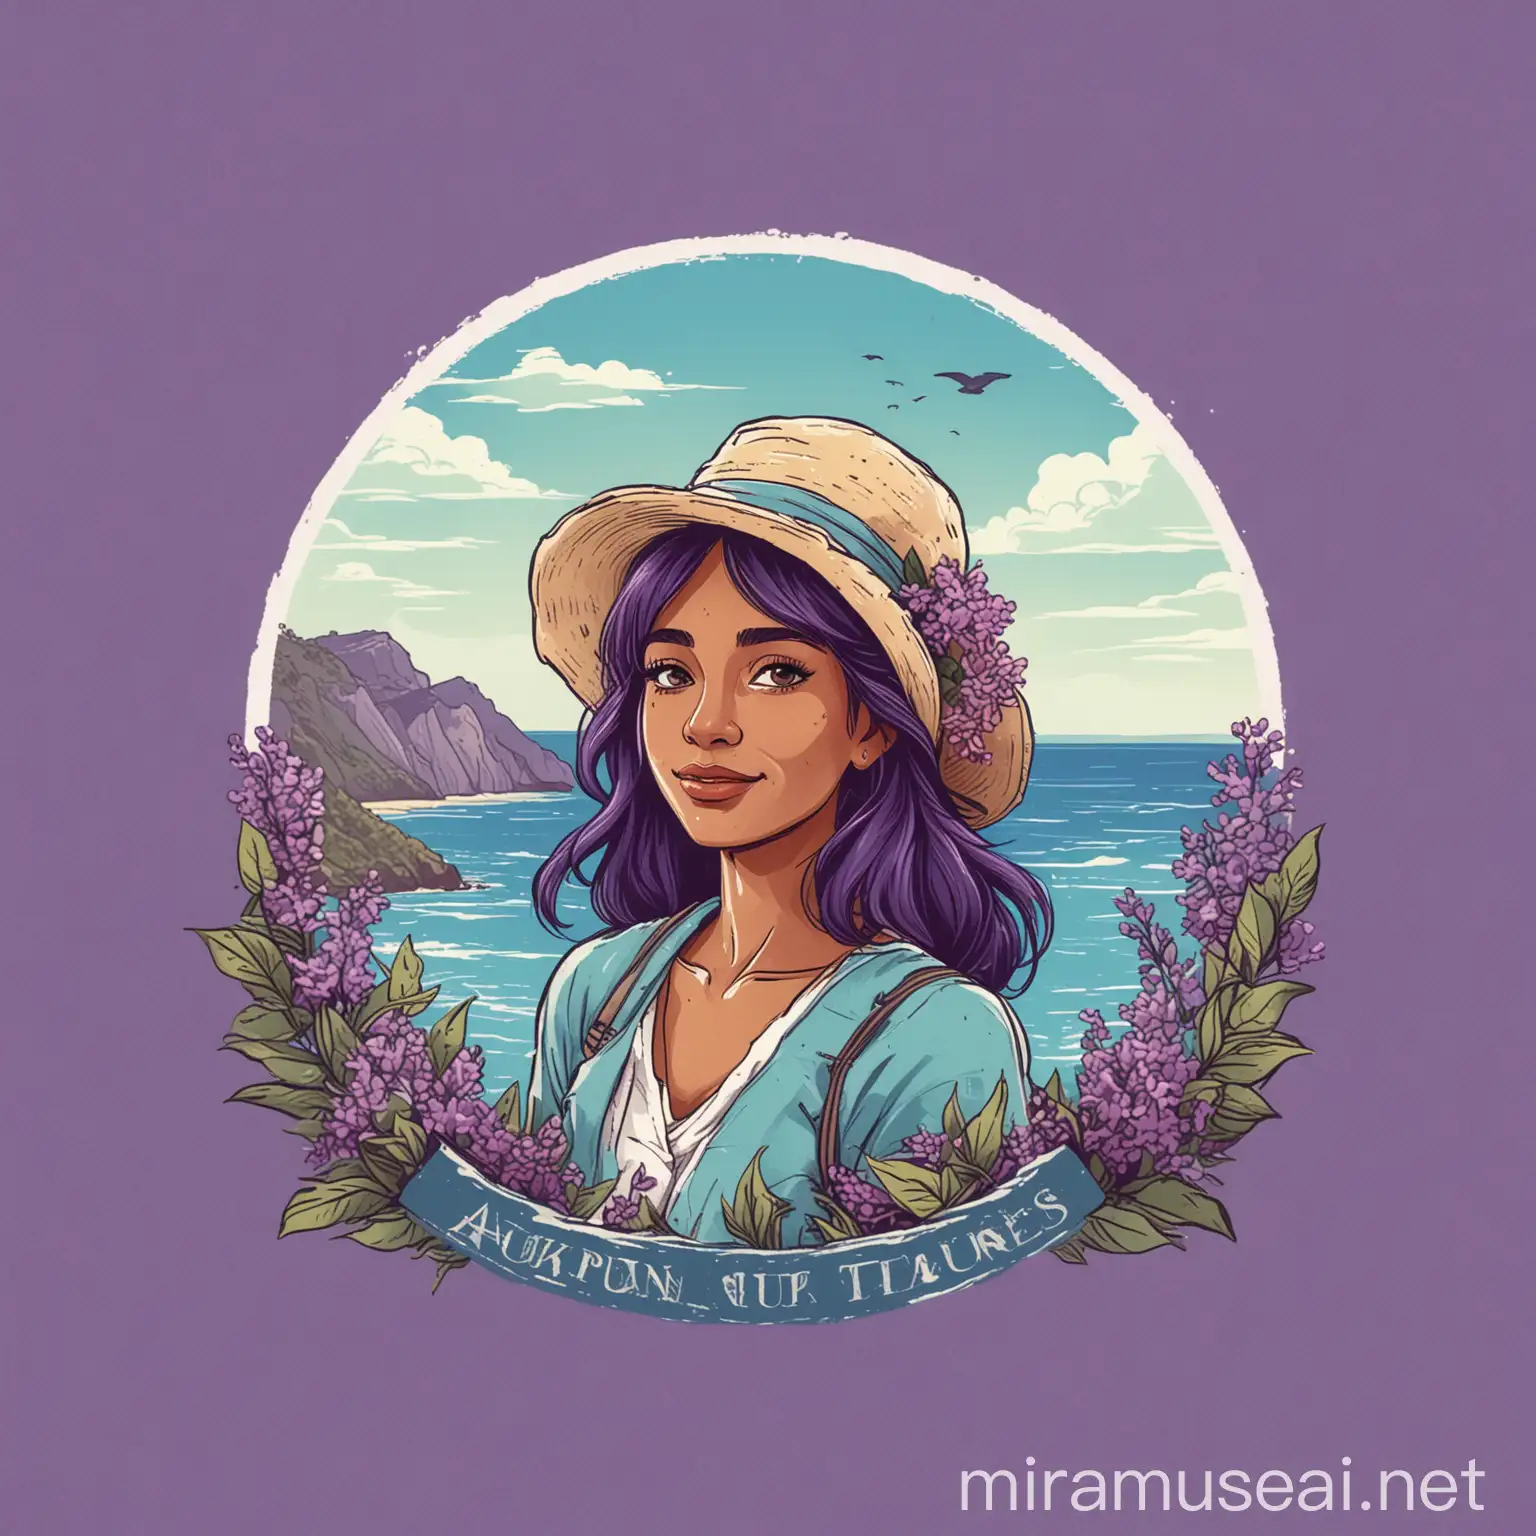 Eager Traveler Logo in Tranquil Lilac Tosca Sage Green and Blue Ocean Colors